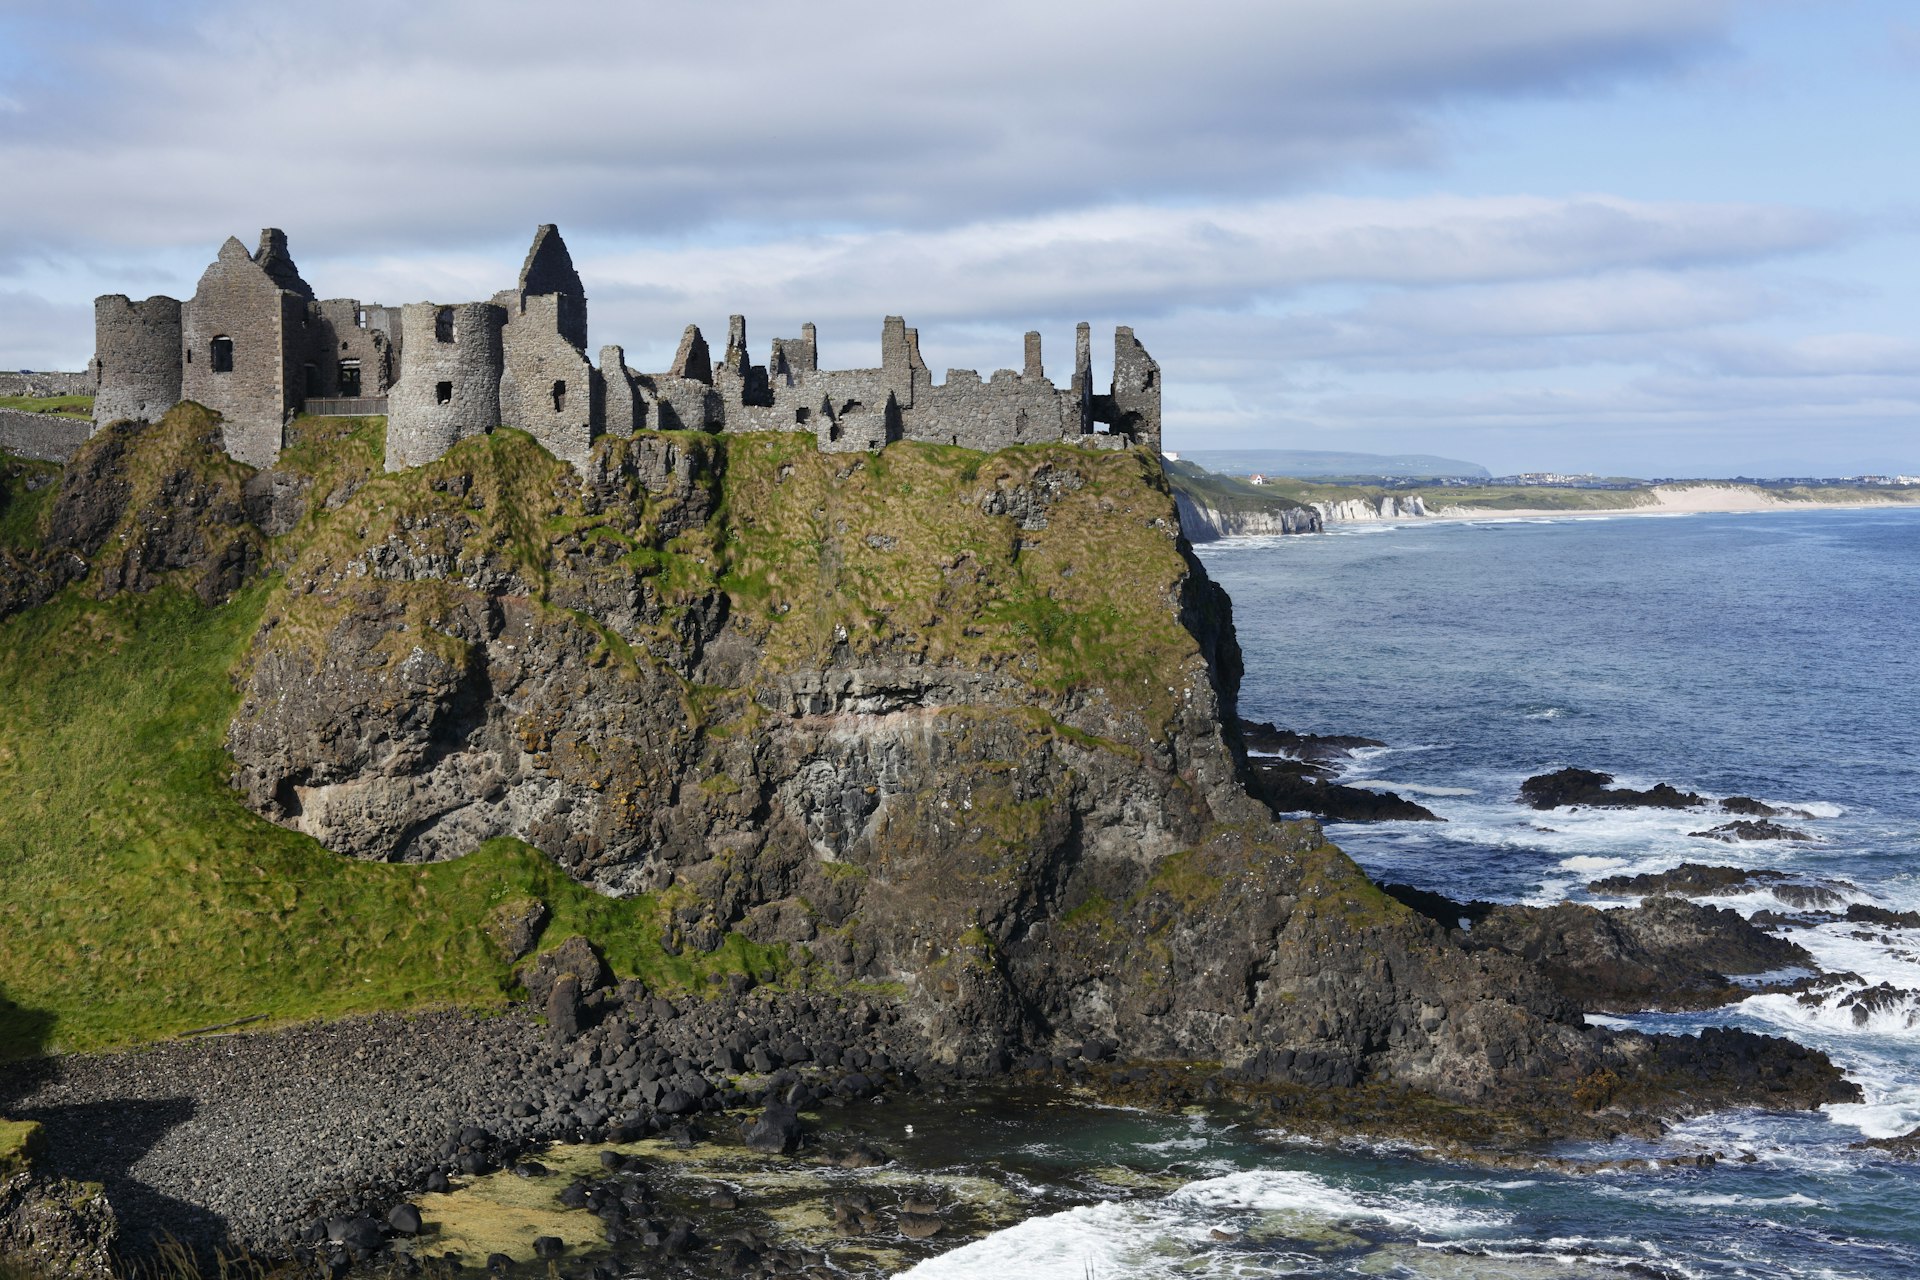 Dunluce Castle, looking towards the gleaming cliffs of Whiterocks